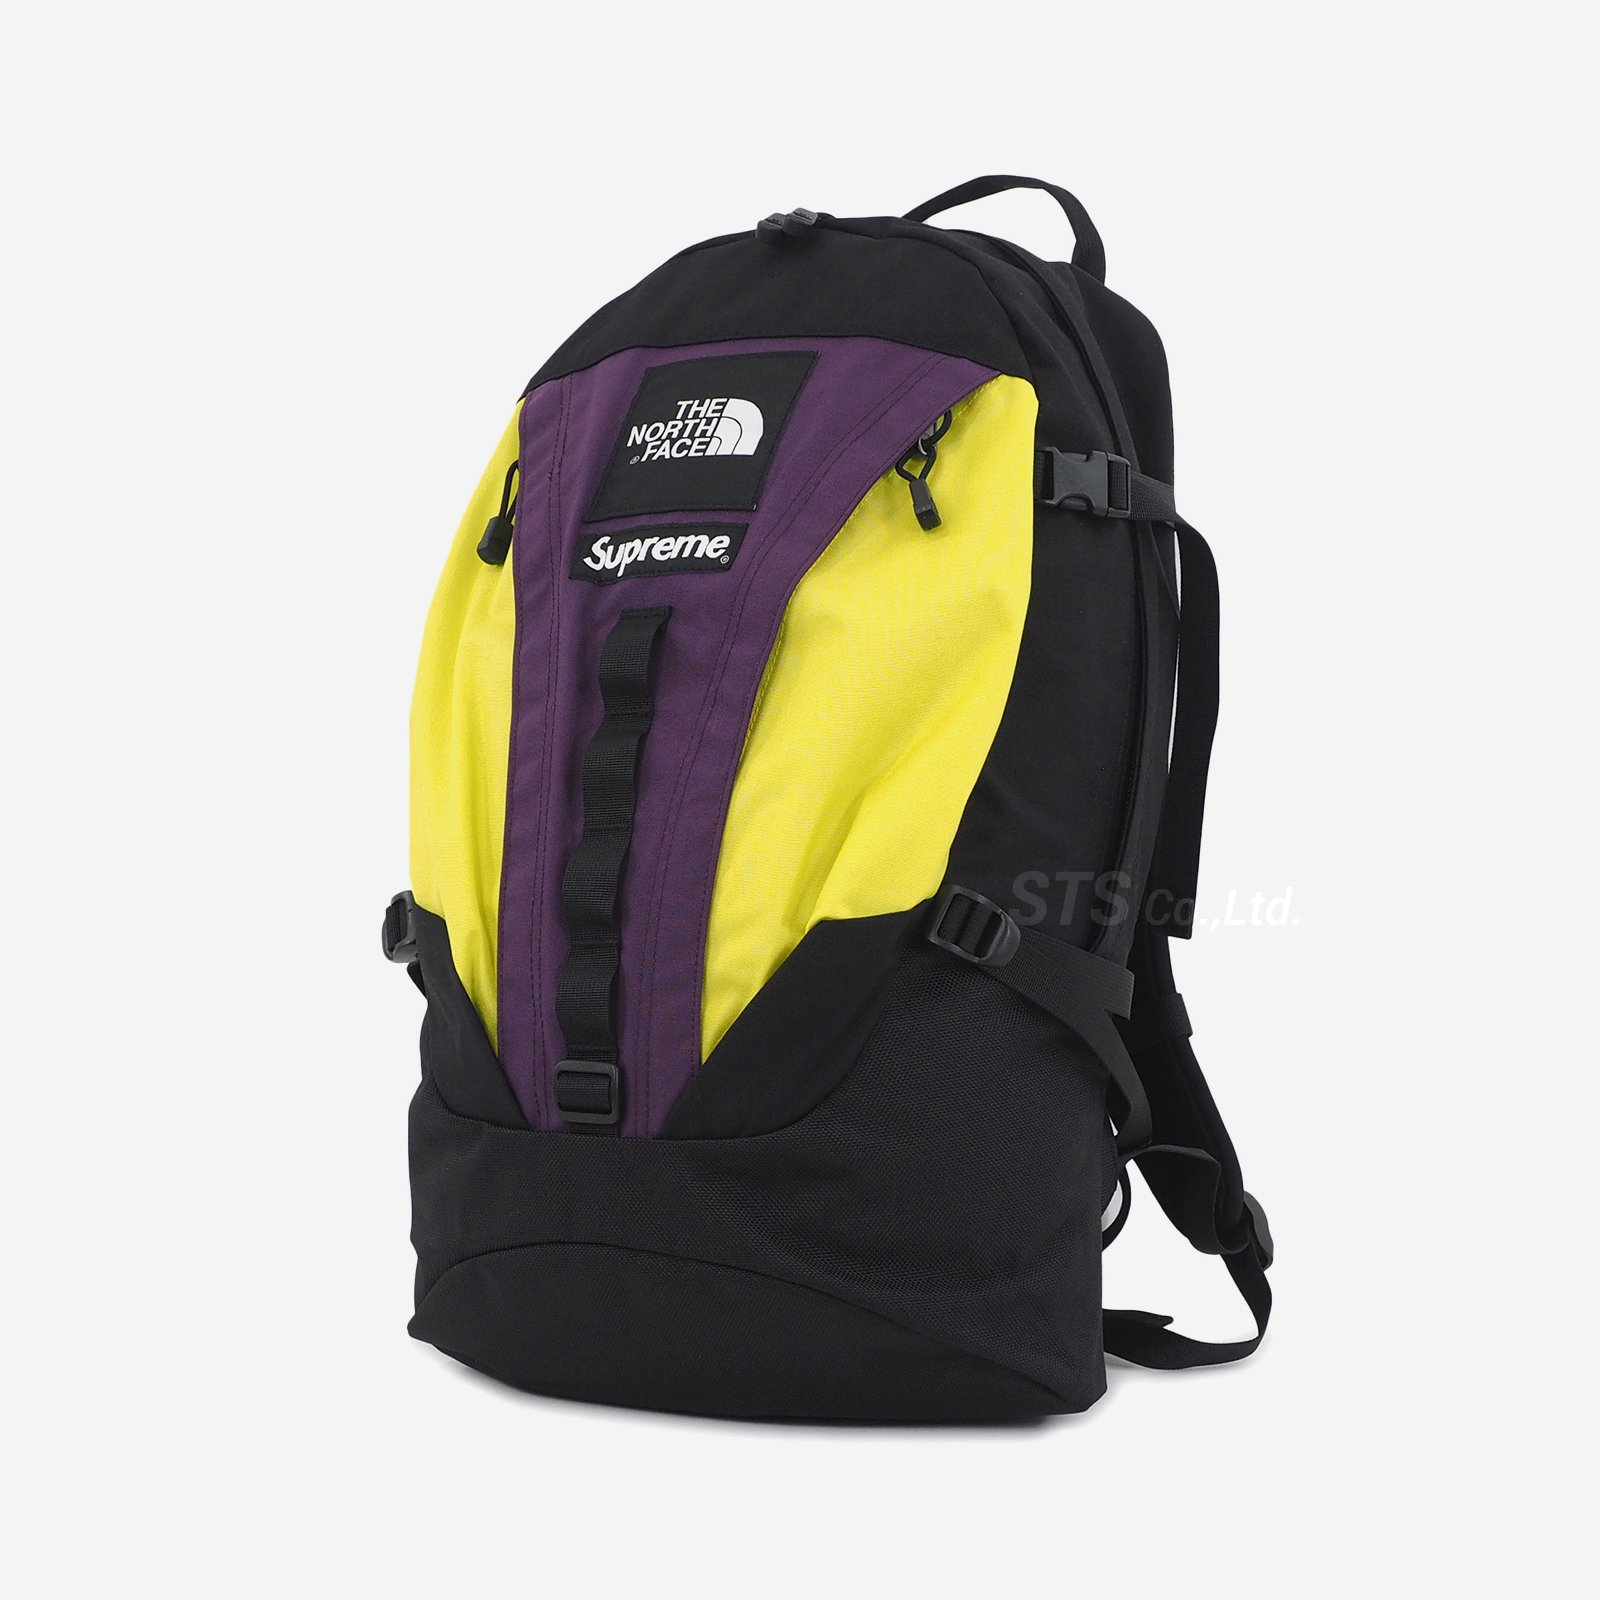 Supreme TheNorthFace Expedition Backpack